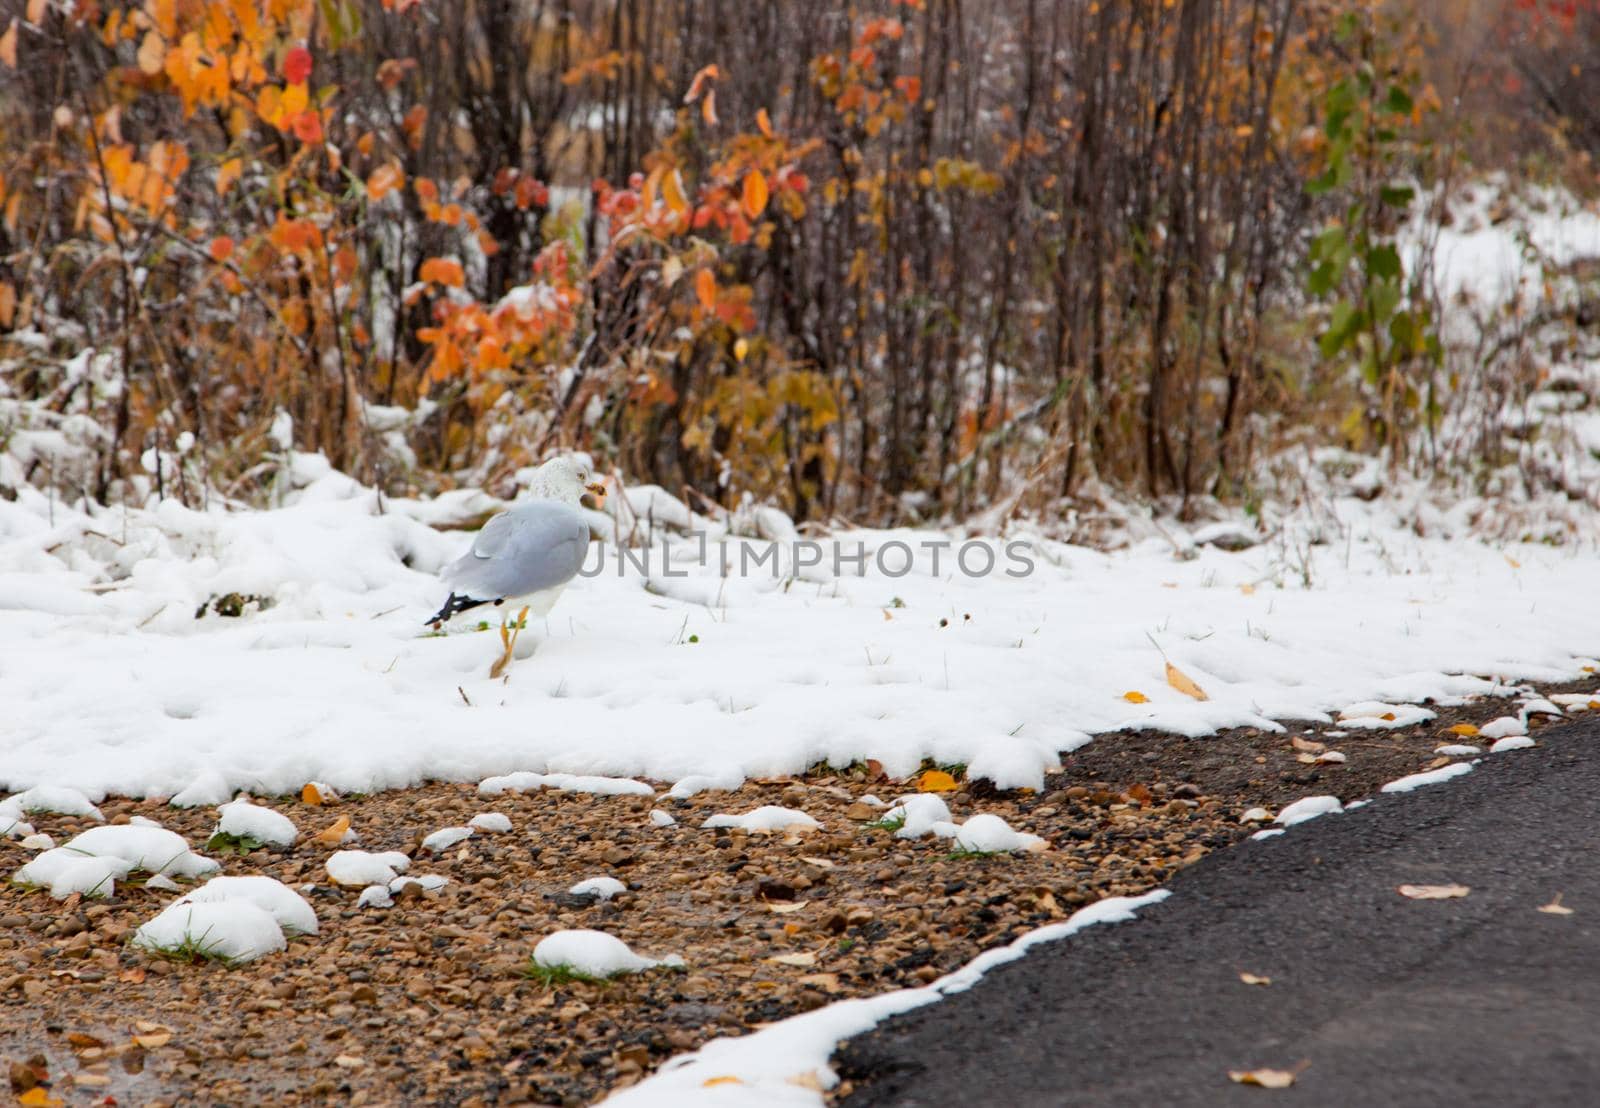  a seagull stands among snow and autumn colored trees